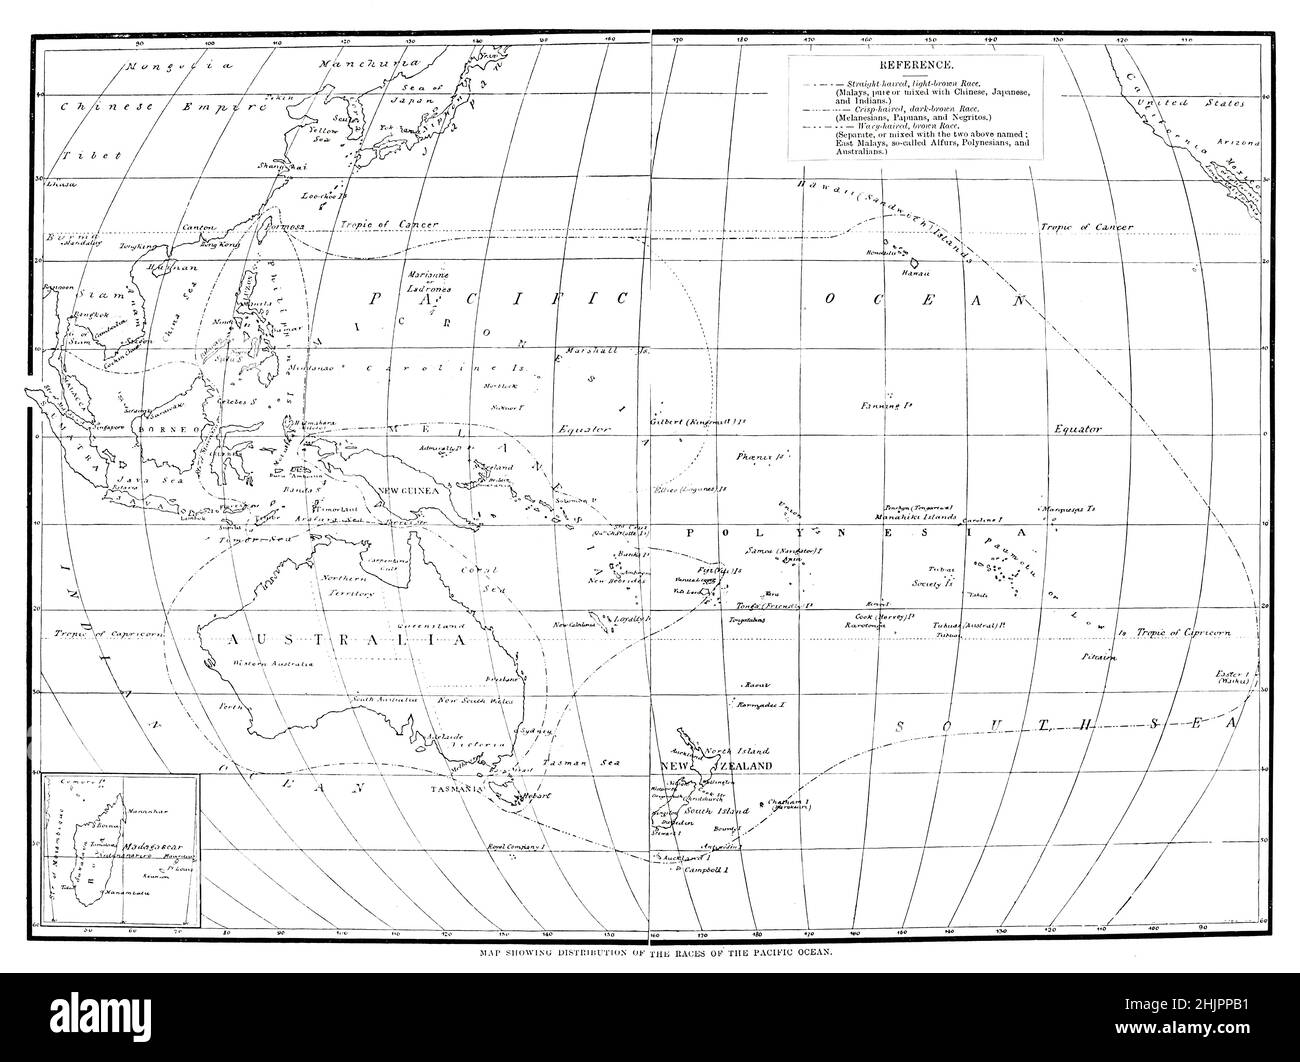 Map showing the distribution of races of the Pacific Ocean from the book '  The living races of mankind ' Vol 1 by Henry Neville Hutchinson,, editors John Walter Gregory, and Richard Lydekker, Publisher: London,  Hutchinson & co 1901 Stock Photo